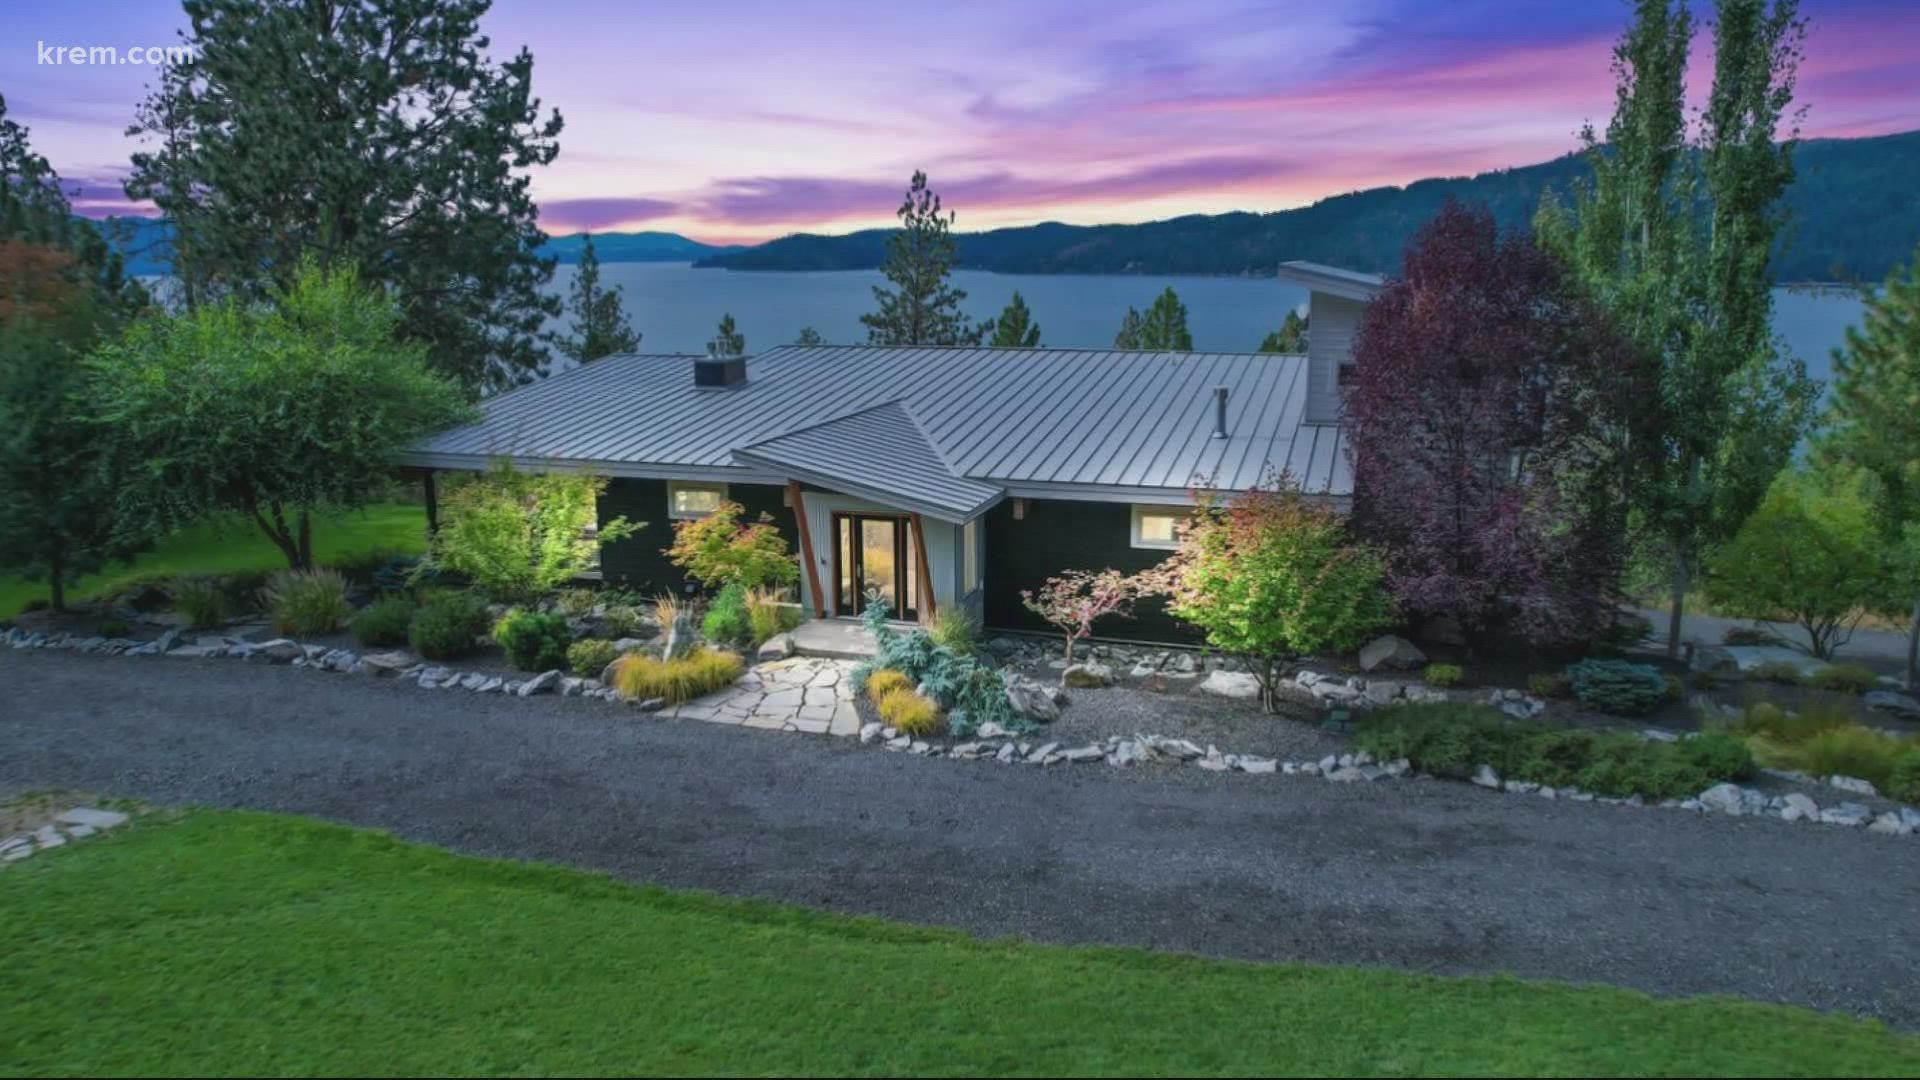 The 7.83-acre house has views of Lake Coeur d’Alene and an additional 5.26 acres of buildable land.